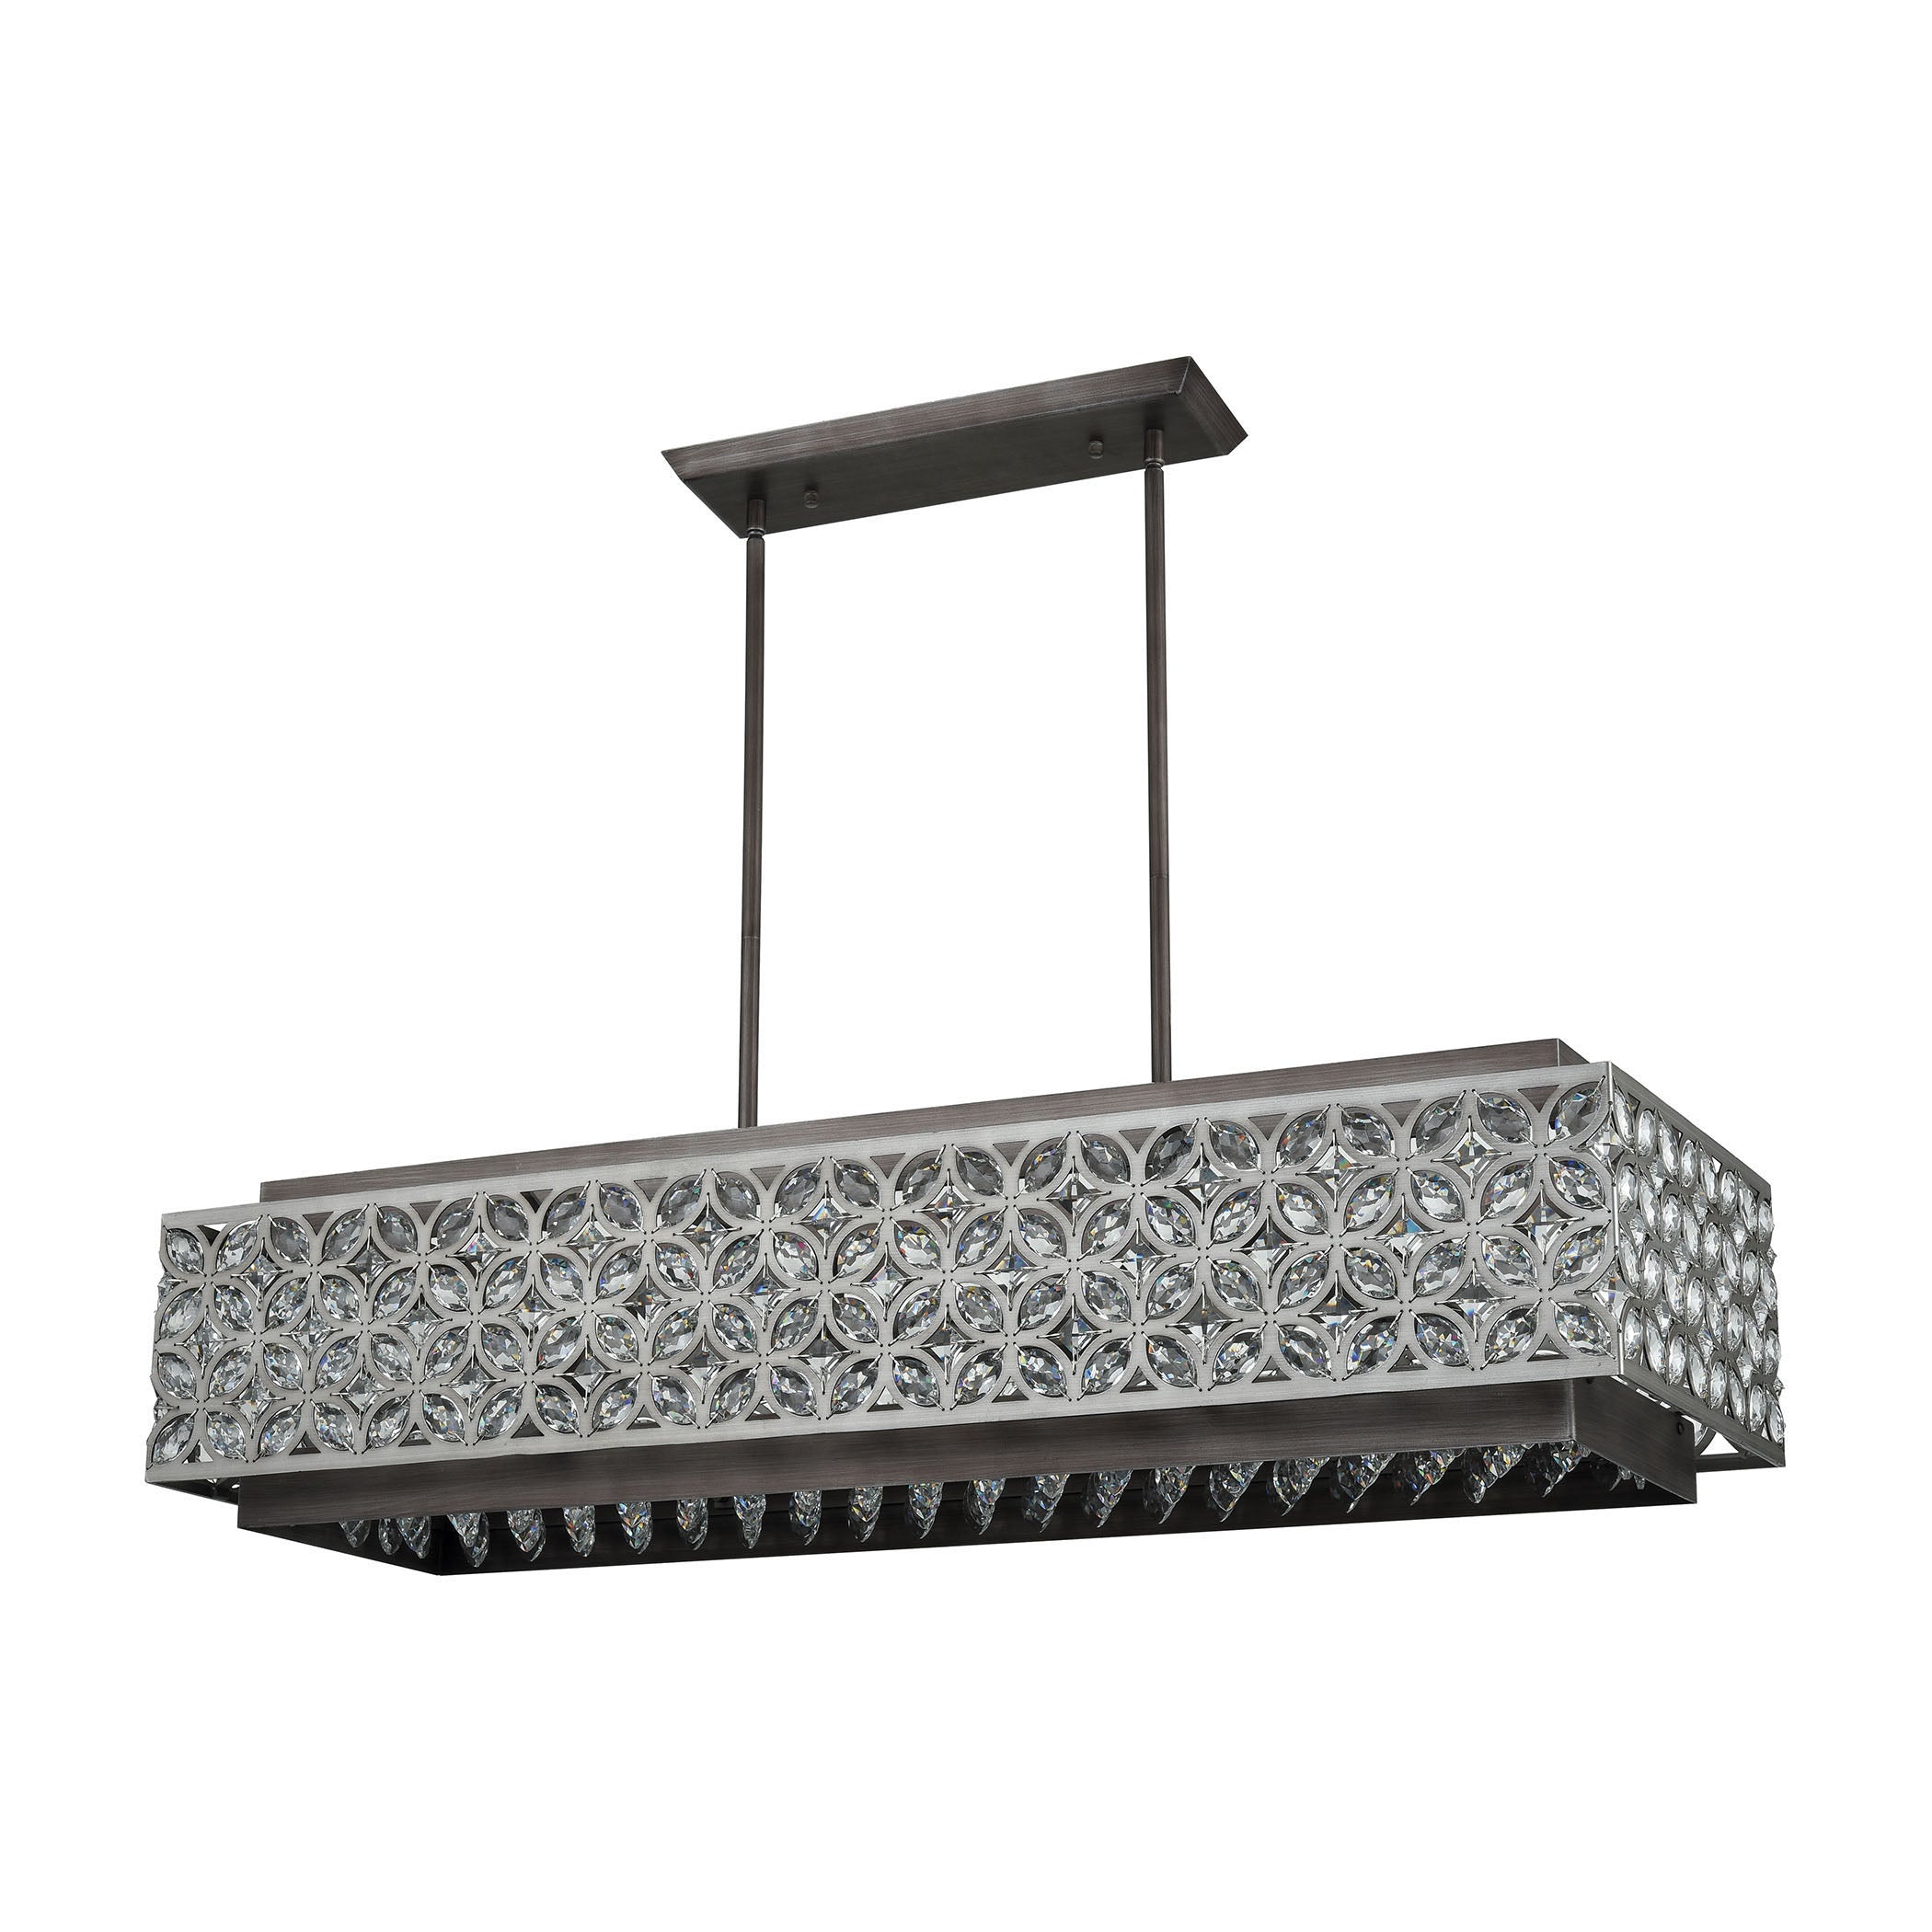 ELK Lighting 12165/8 Rosslyn 8-Light Linear Chandelier in Weathered Zinc and Matte Silver with Crystal and Metalwork